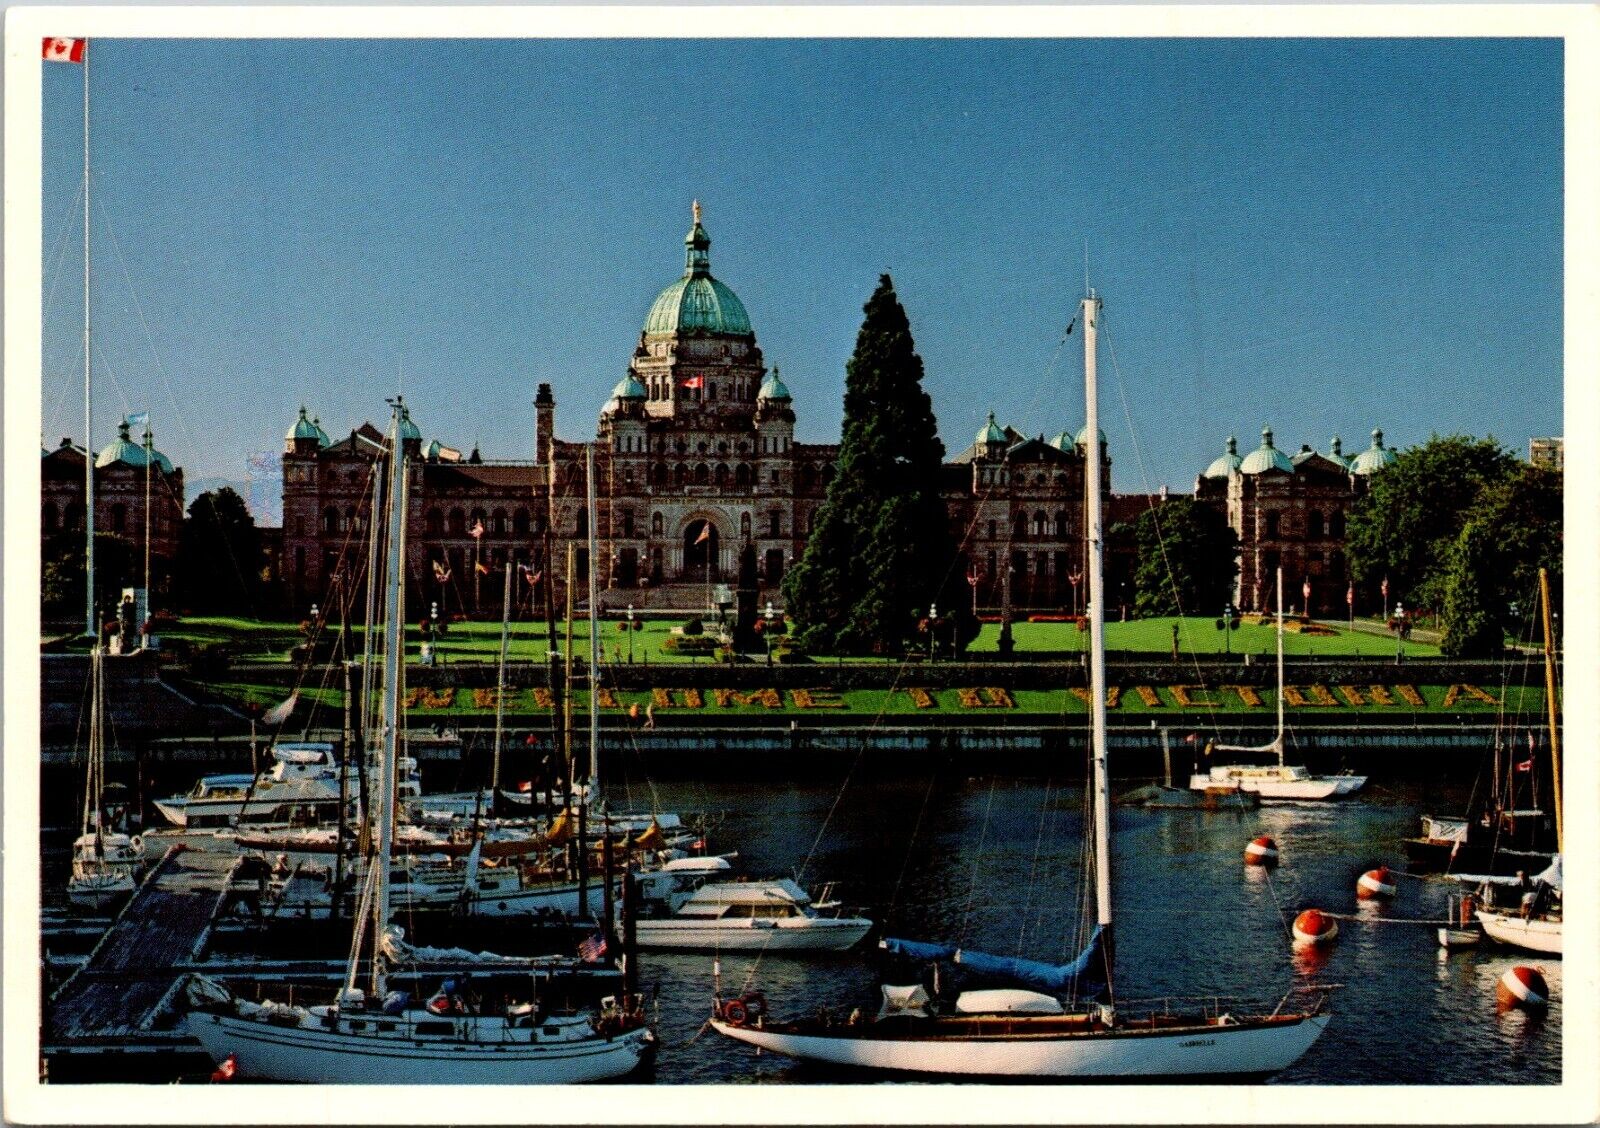 Parliament Buildings Victoria, British Columbia, Canada Postcard Boats on Water